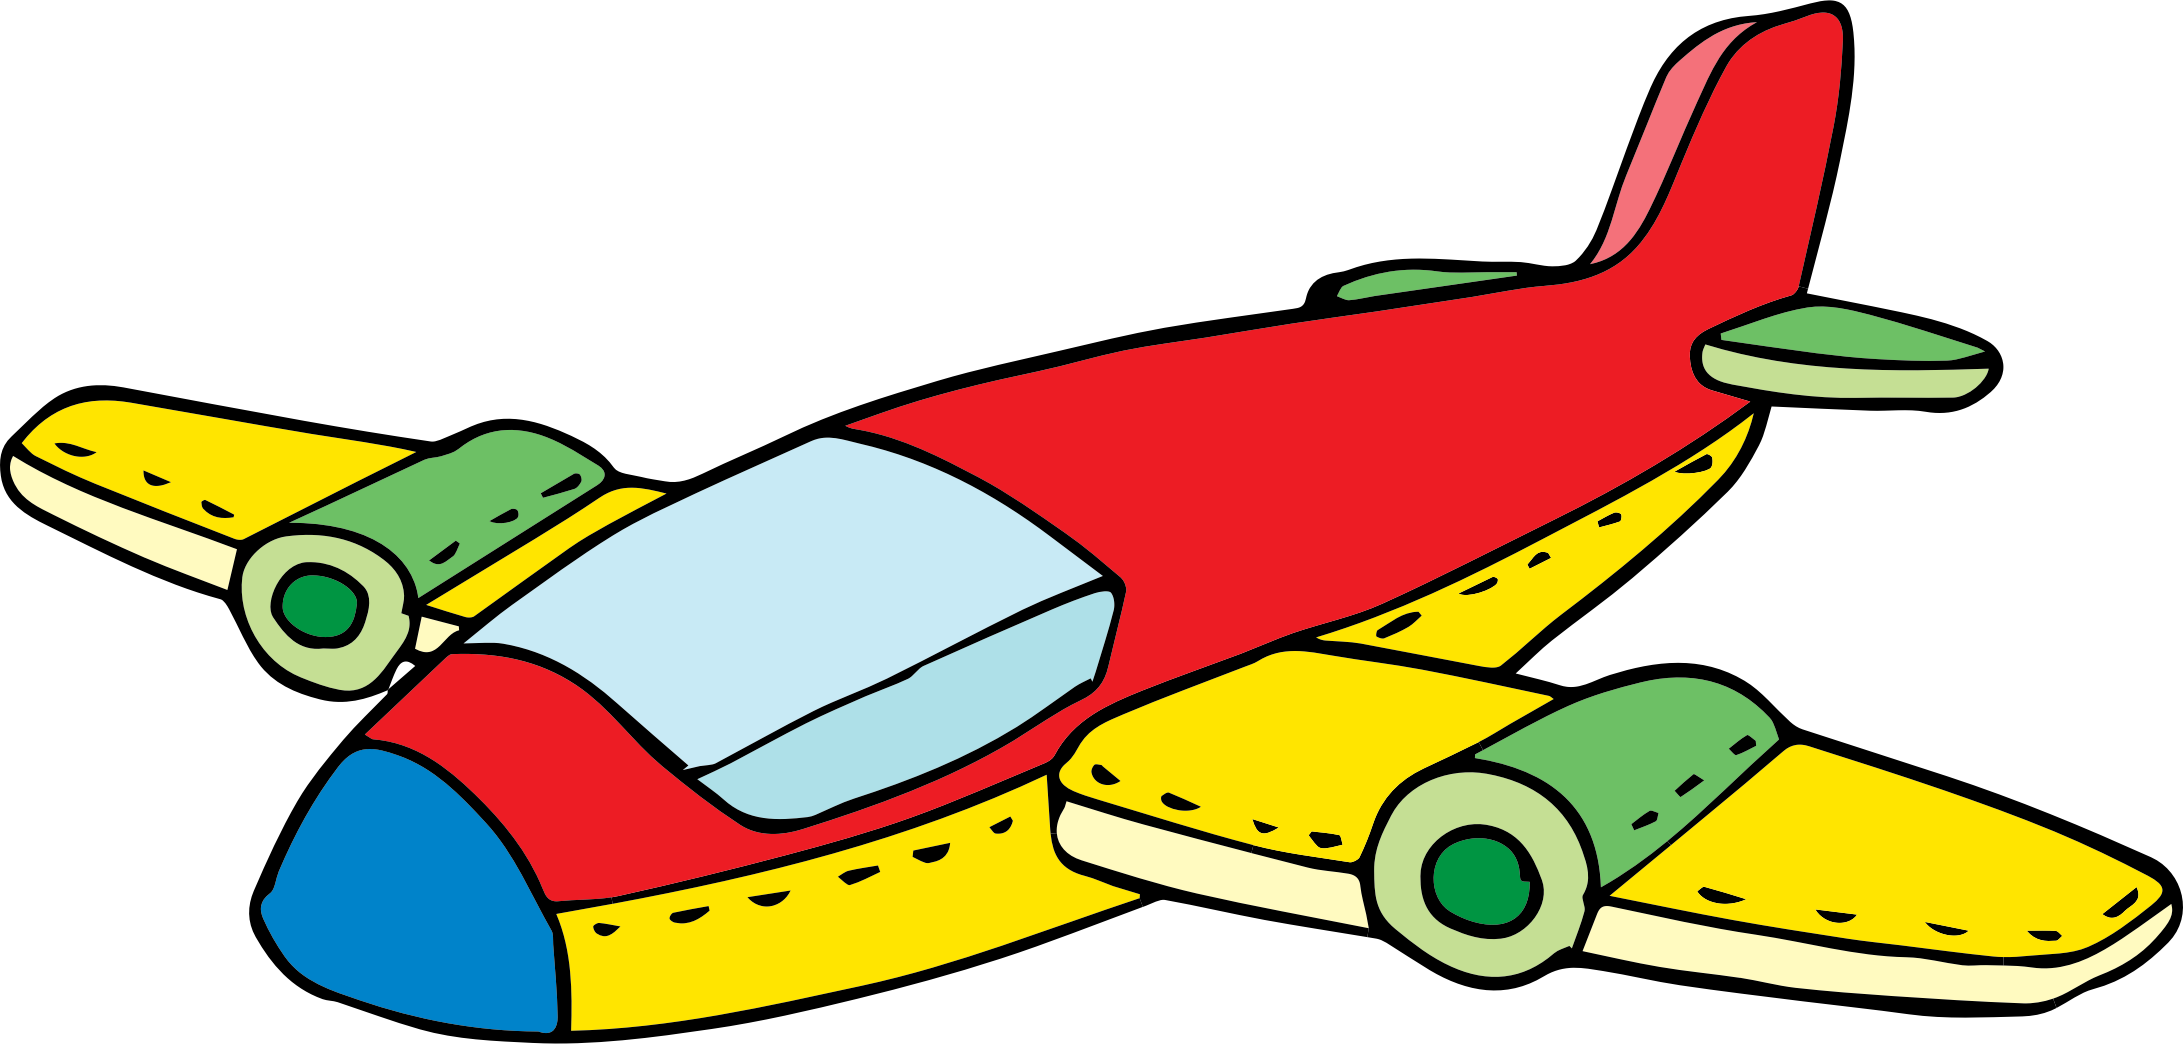 Young clipart toy plane. Airplane images for kids